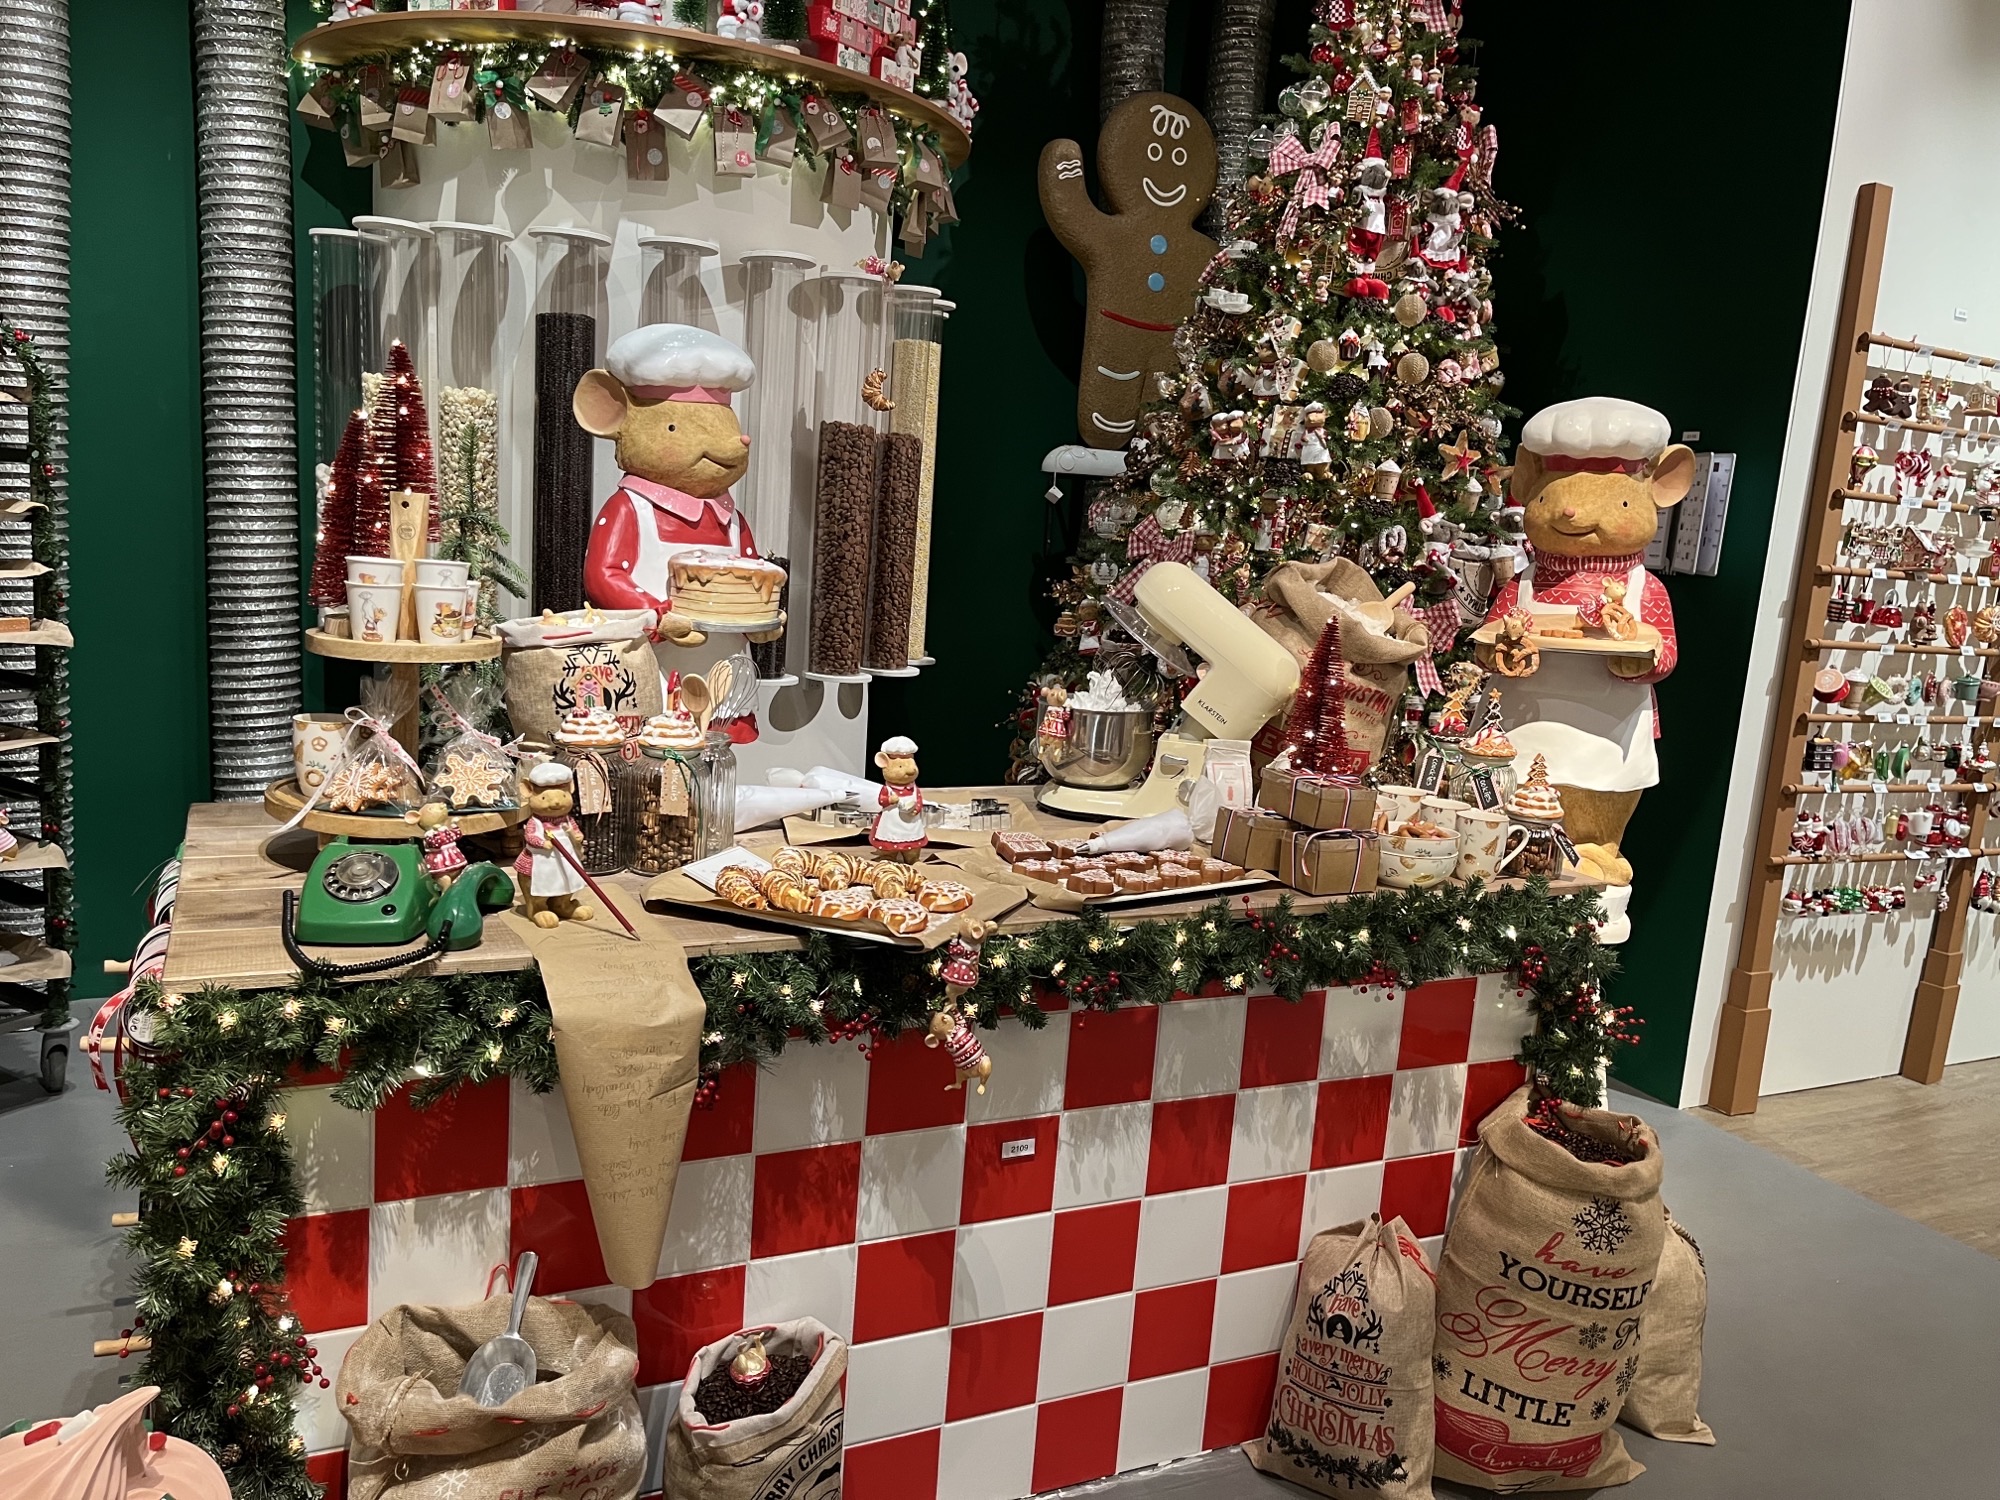 A display of christmas decorations in a store.